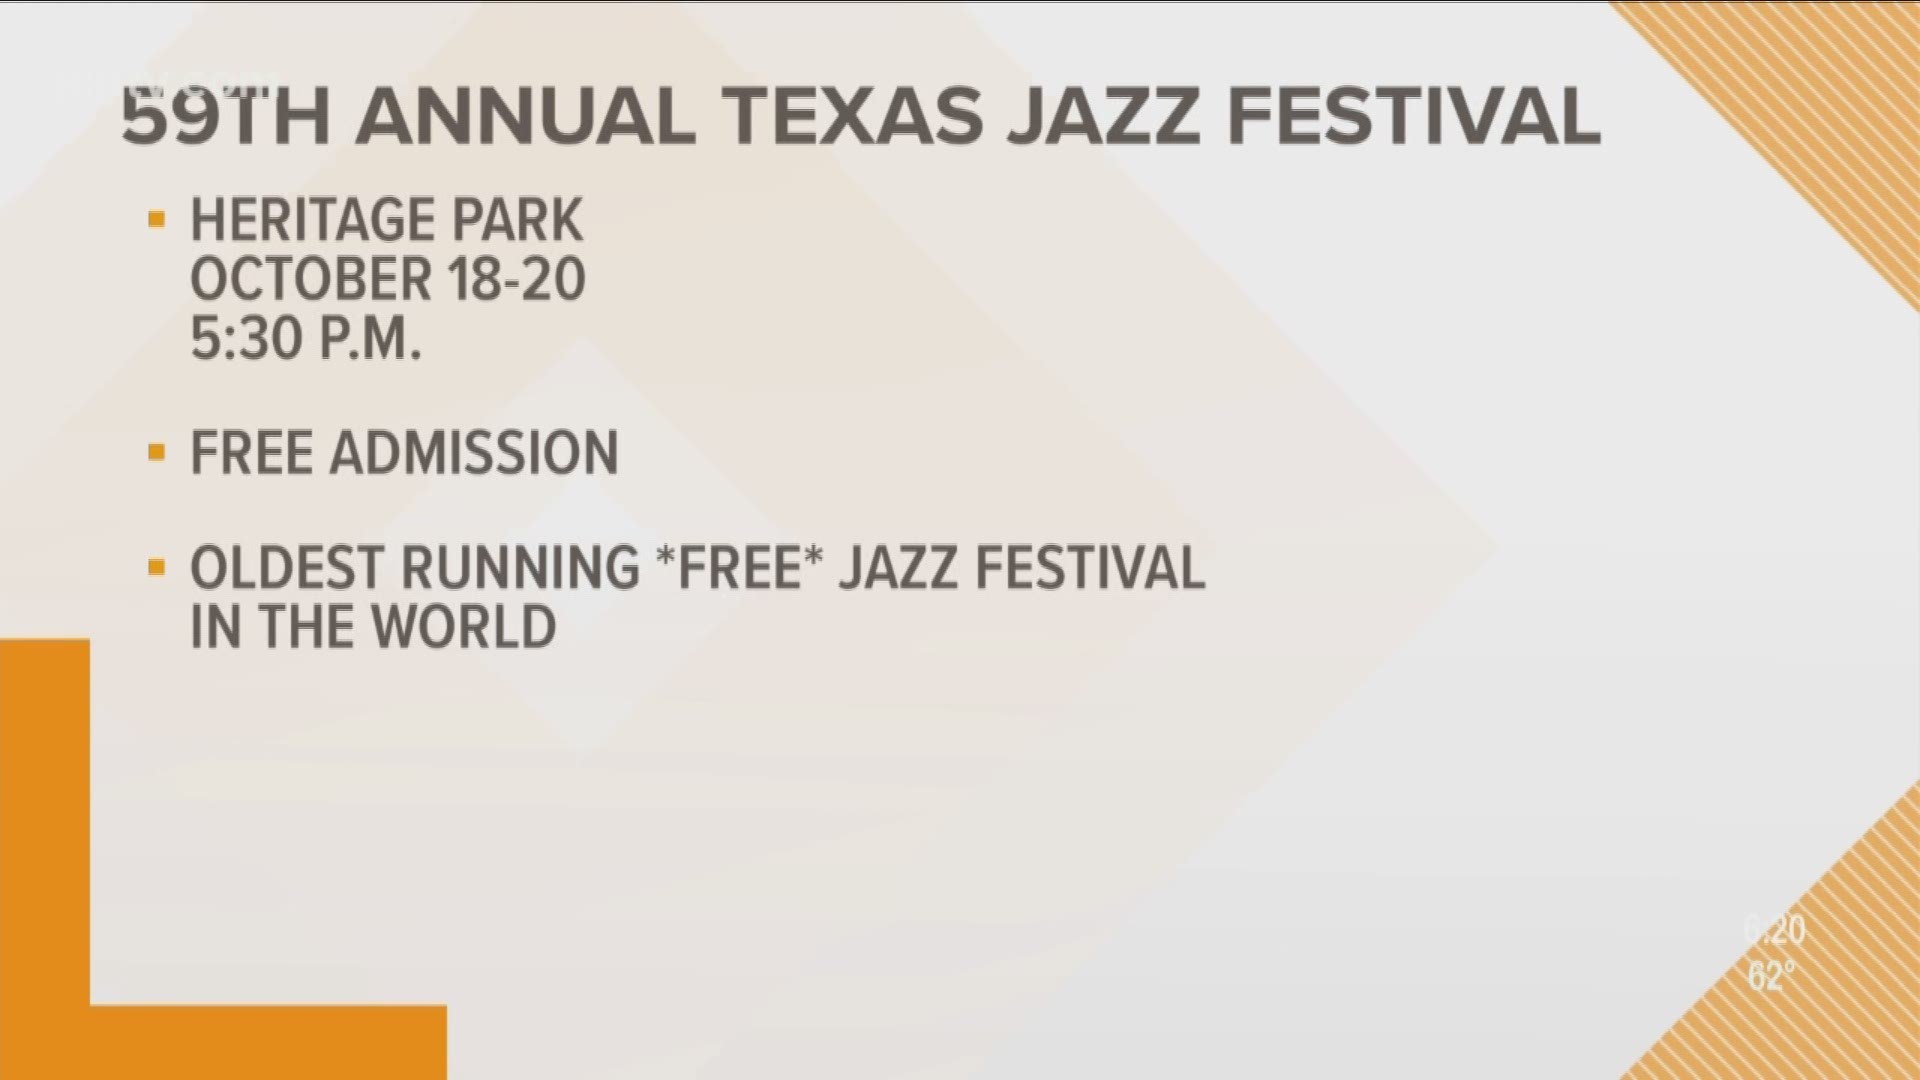 Come out to Heritage Park tonight, Saturday, and Sunday for the 59th Annual Texas Jazz Festival!